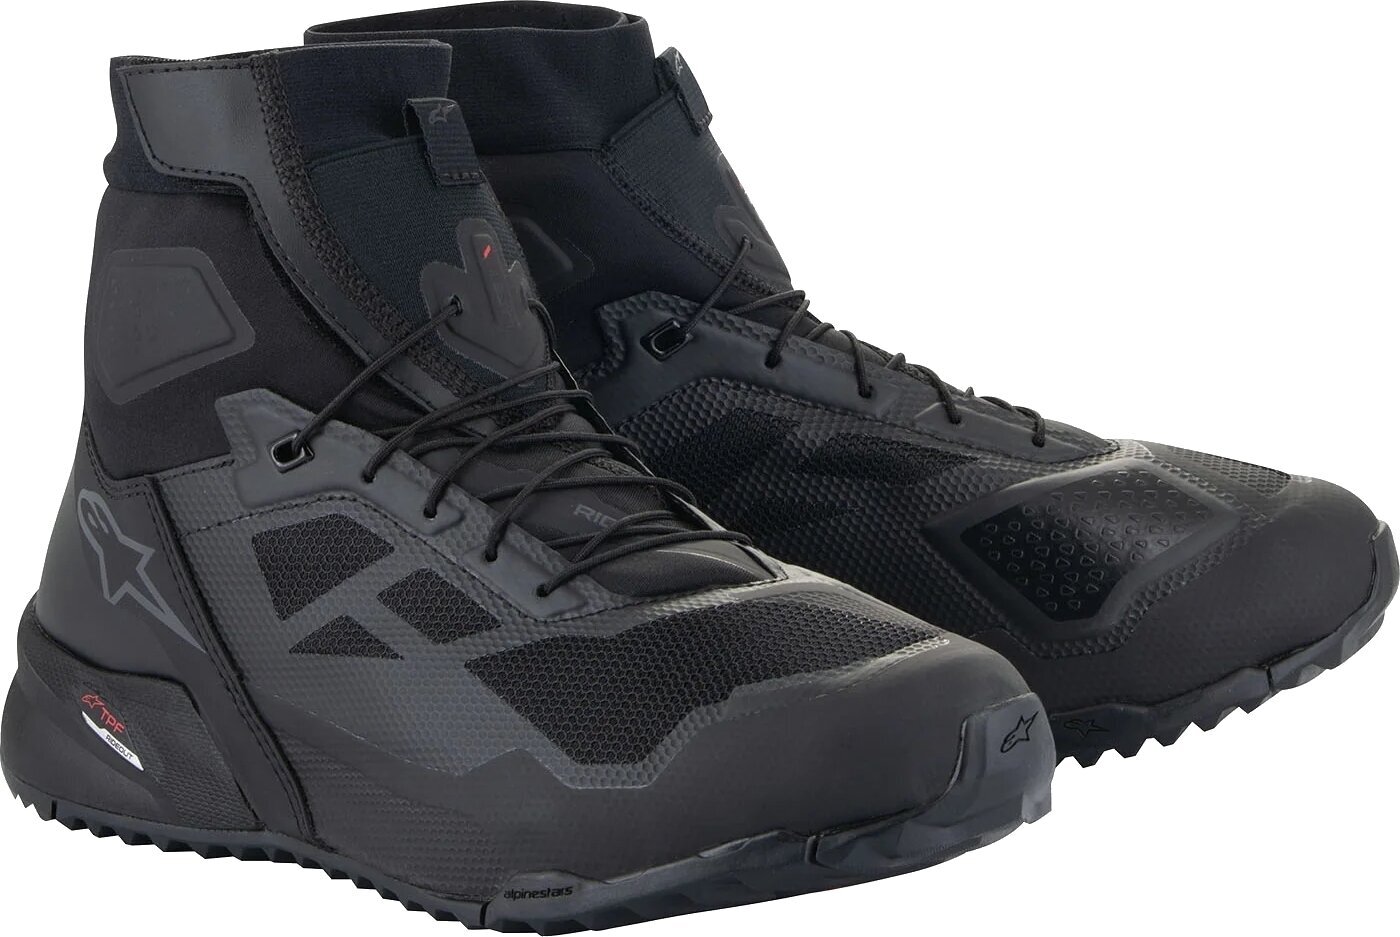 Motorcycle Boots Alpinestars CR-1 Shoes Black/Dark Grey 45,5 Motorcycle Boots